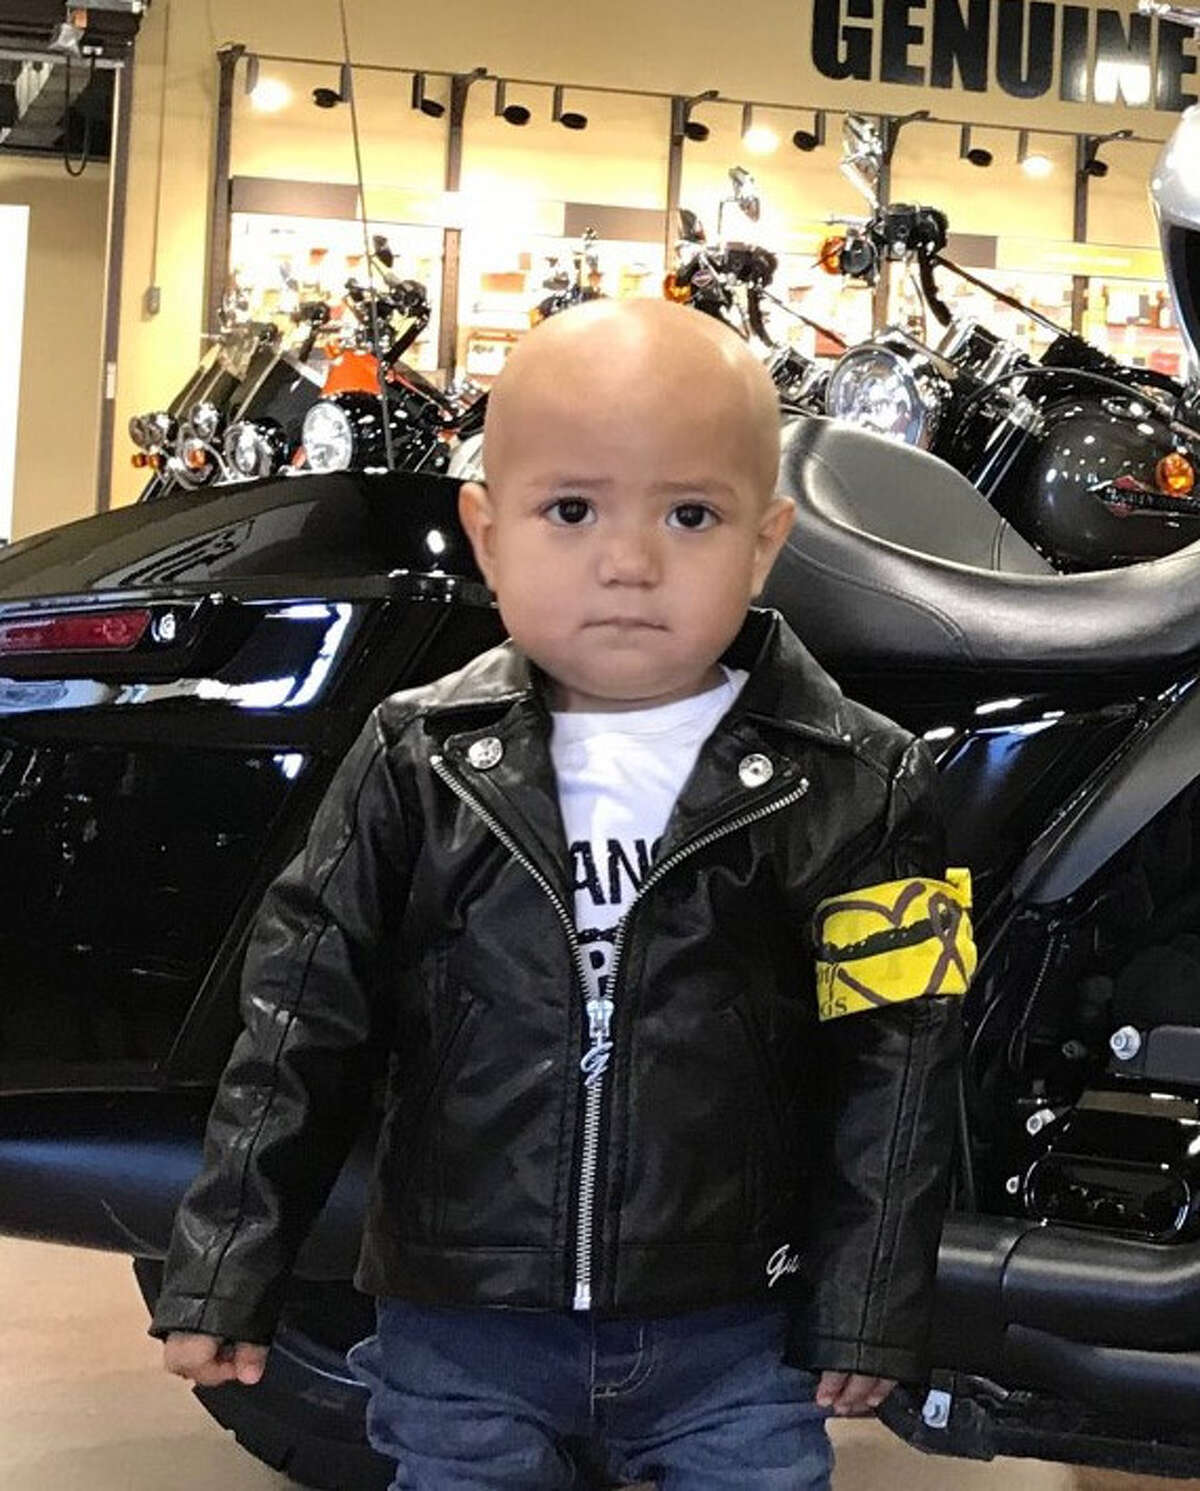 Native Laredoan and courageous toddler Bella Sanchez tragically passed away on Tuesday after battle with leukemia.